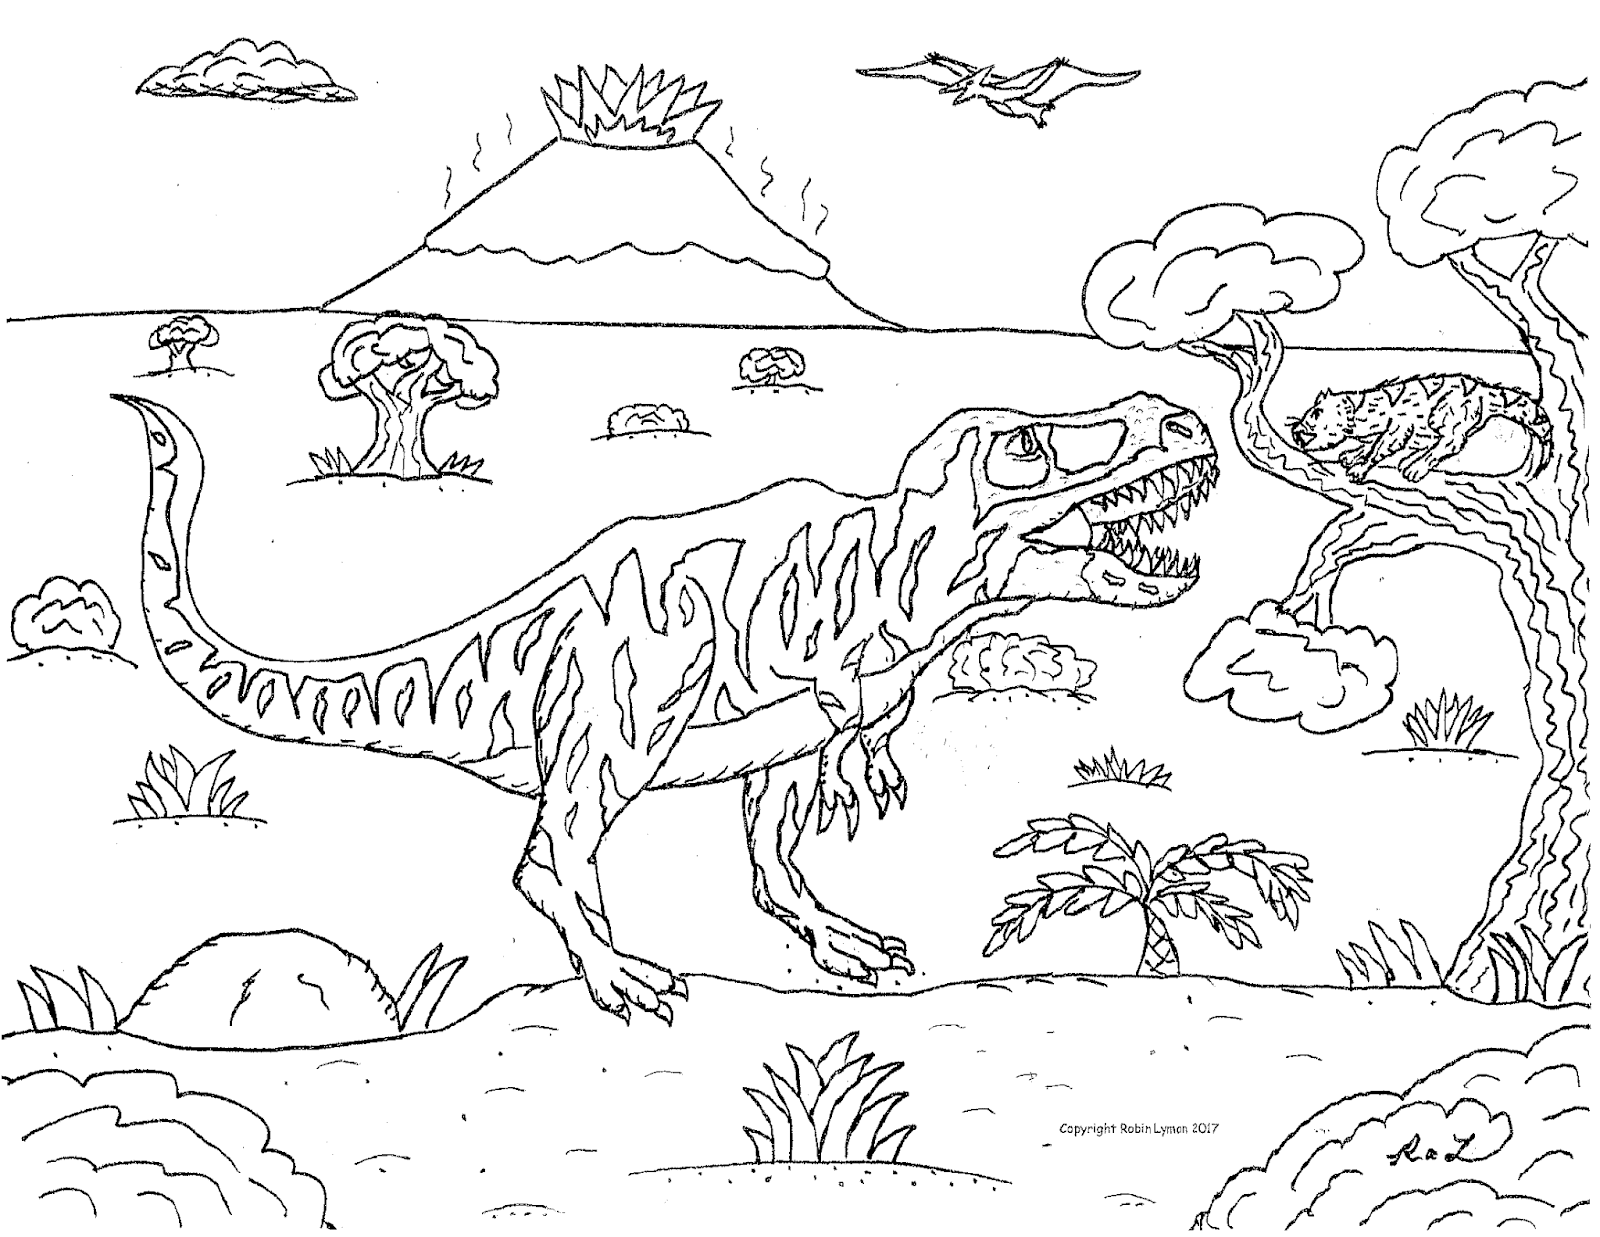 Robin's Great Coloring Pages: Prehistoric Mammals with Modern Mammals ...